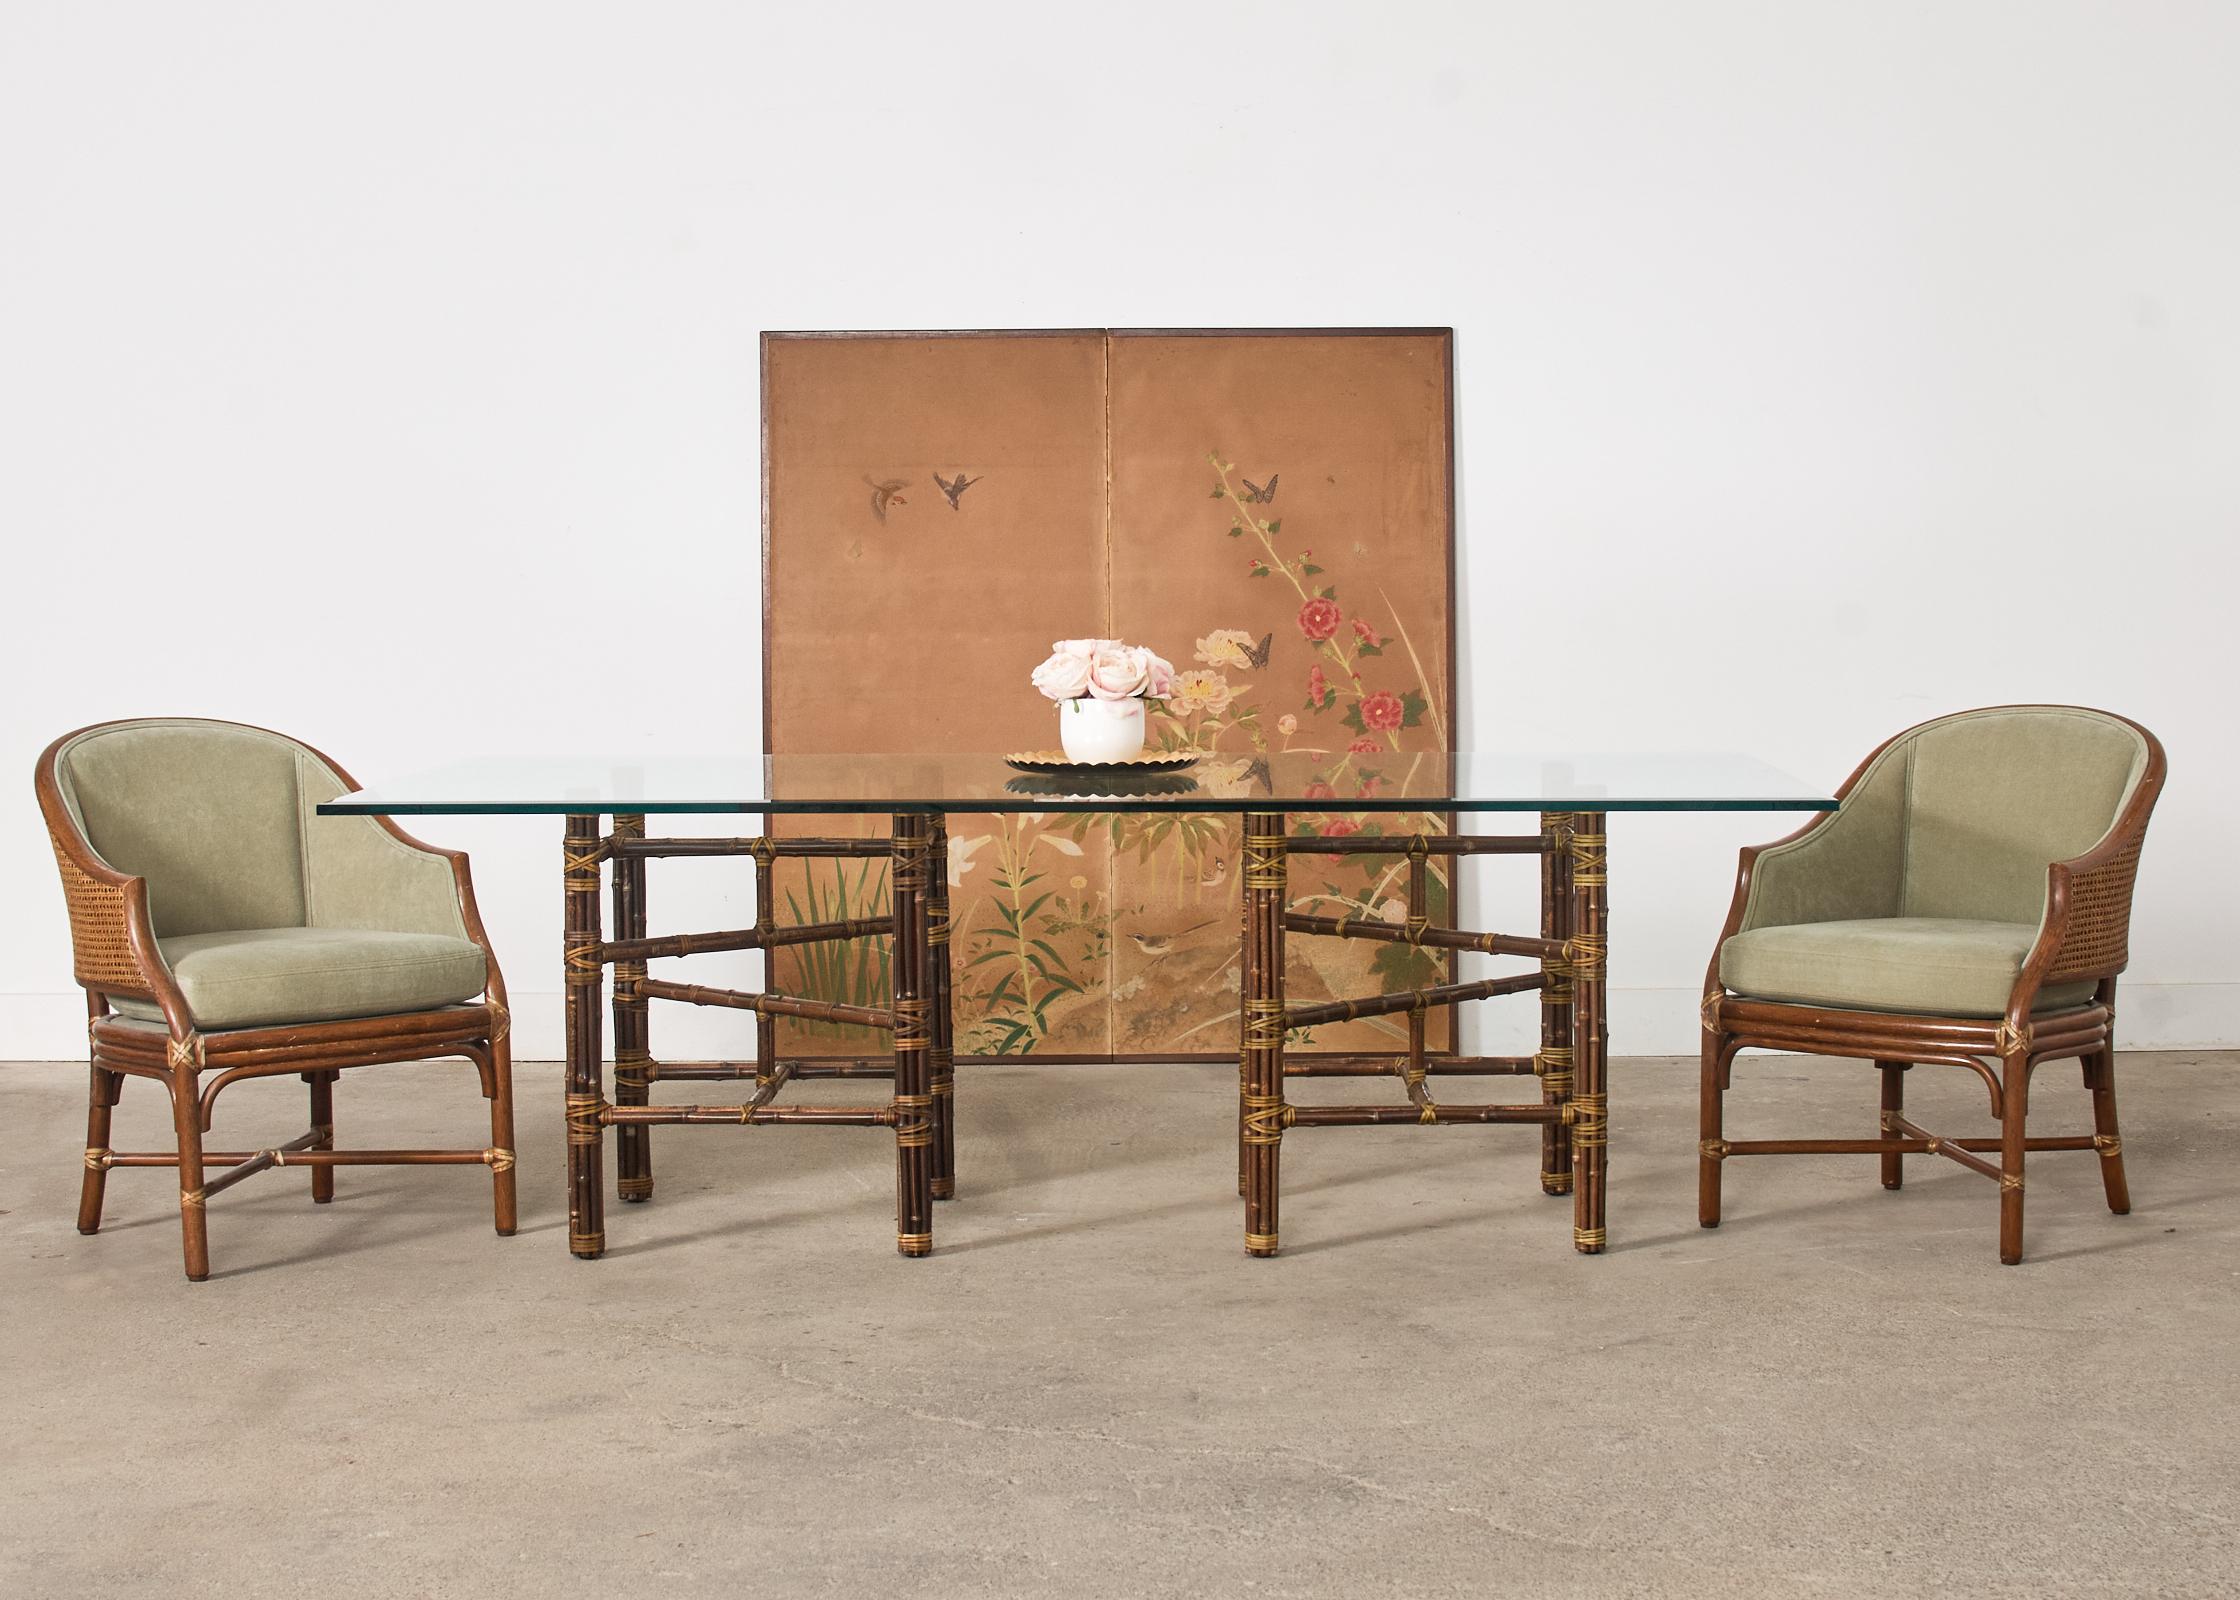 Large and rare bespoke dining table made in the California coastal organic modern style by McGuire, San Francisco. The table features double pedestal supports with a large rectangular pane of glass. The thick original McGuire glass was optional and